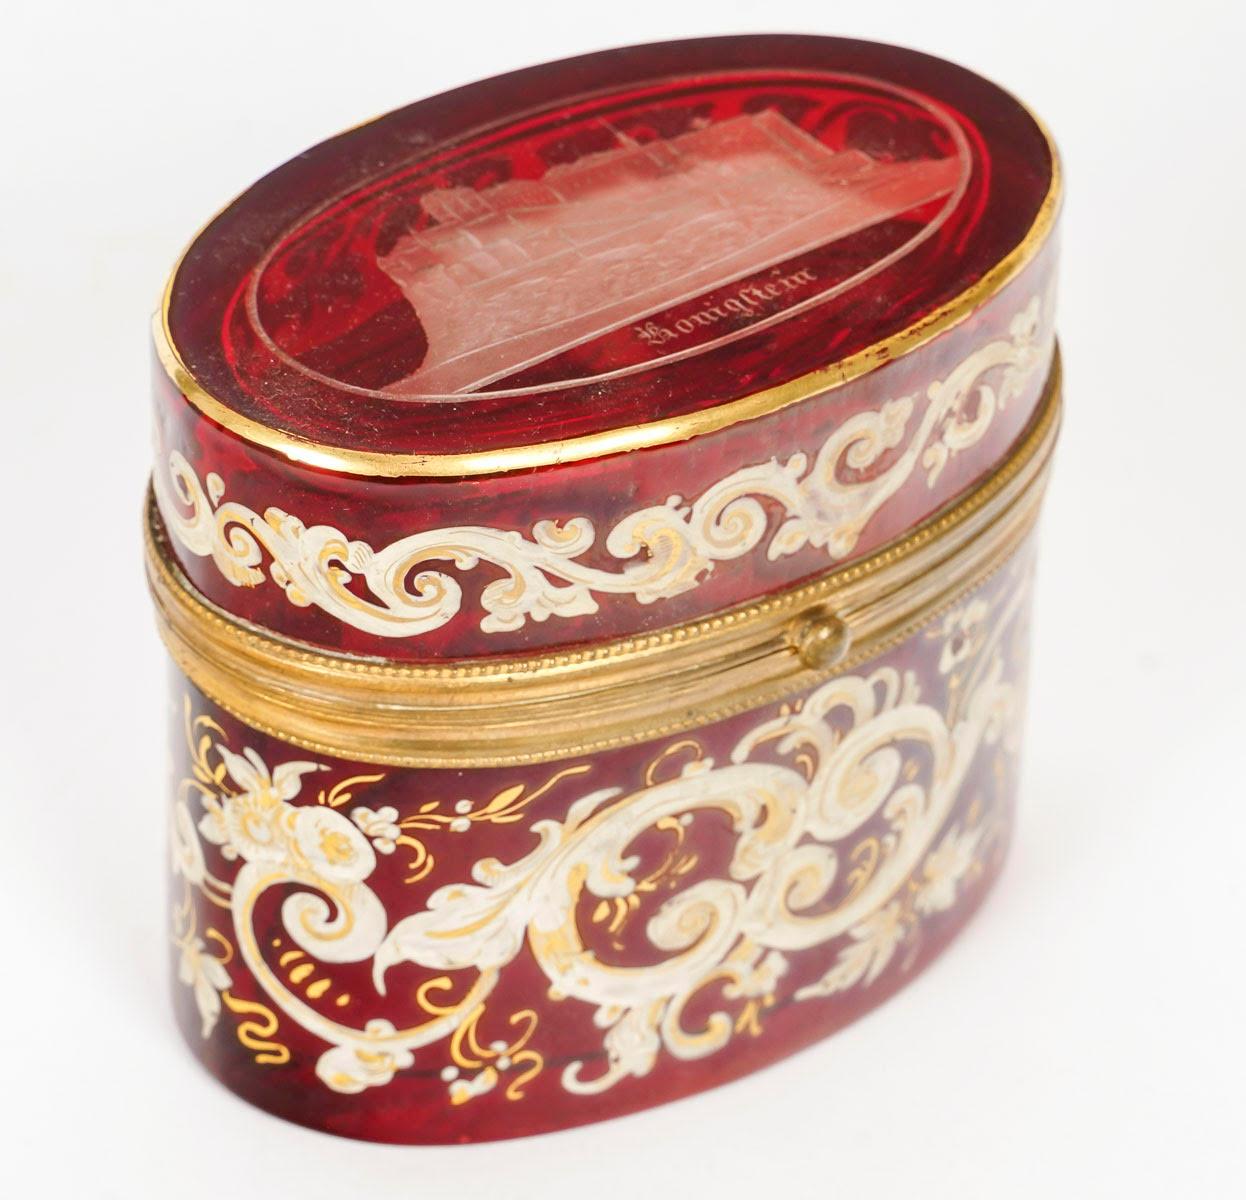 Red Bohemian crystal enamelled box, 19th century, Napoleon III period.

White and gold enamelled red Bohemian crystal case, brass mount, 19th century, Napoleon III period.
h: 9cm, w: 10cm, d: 6cm